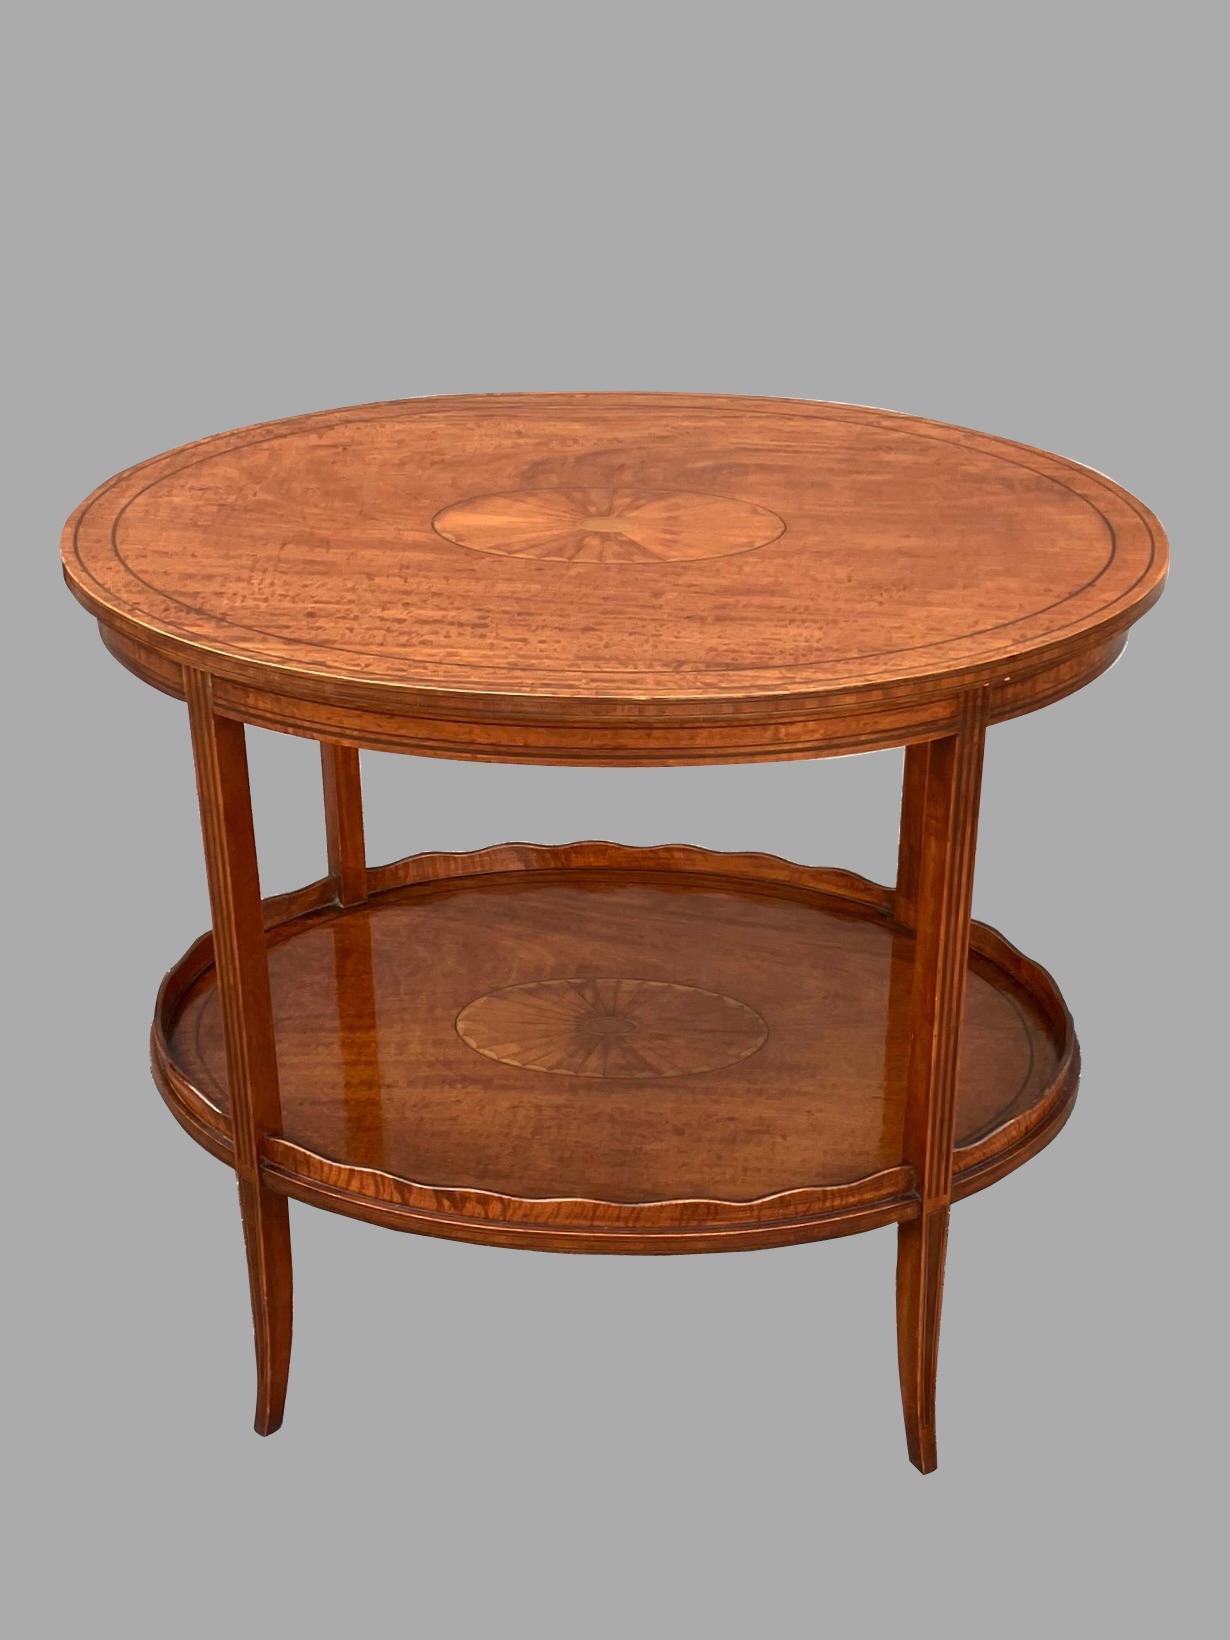 20th Century Hepplewhite Style Inlaid Satin Birch Two-Tier Side Table with Central Paterae